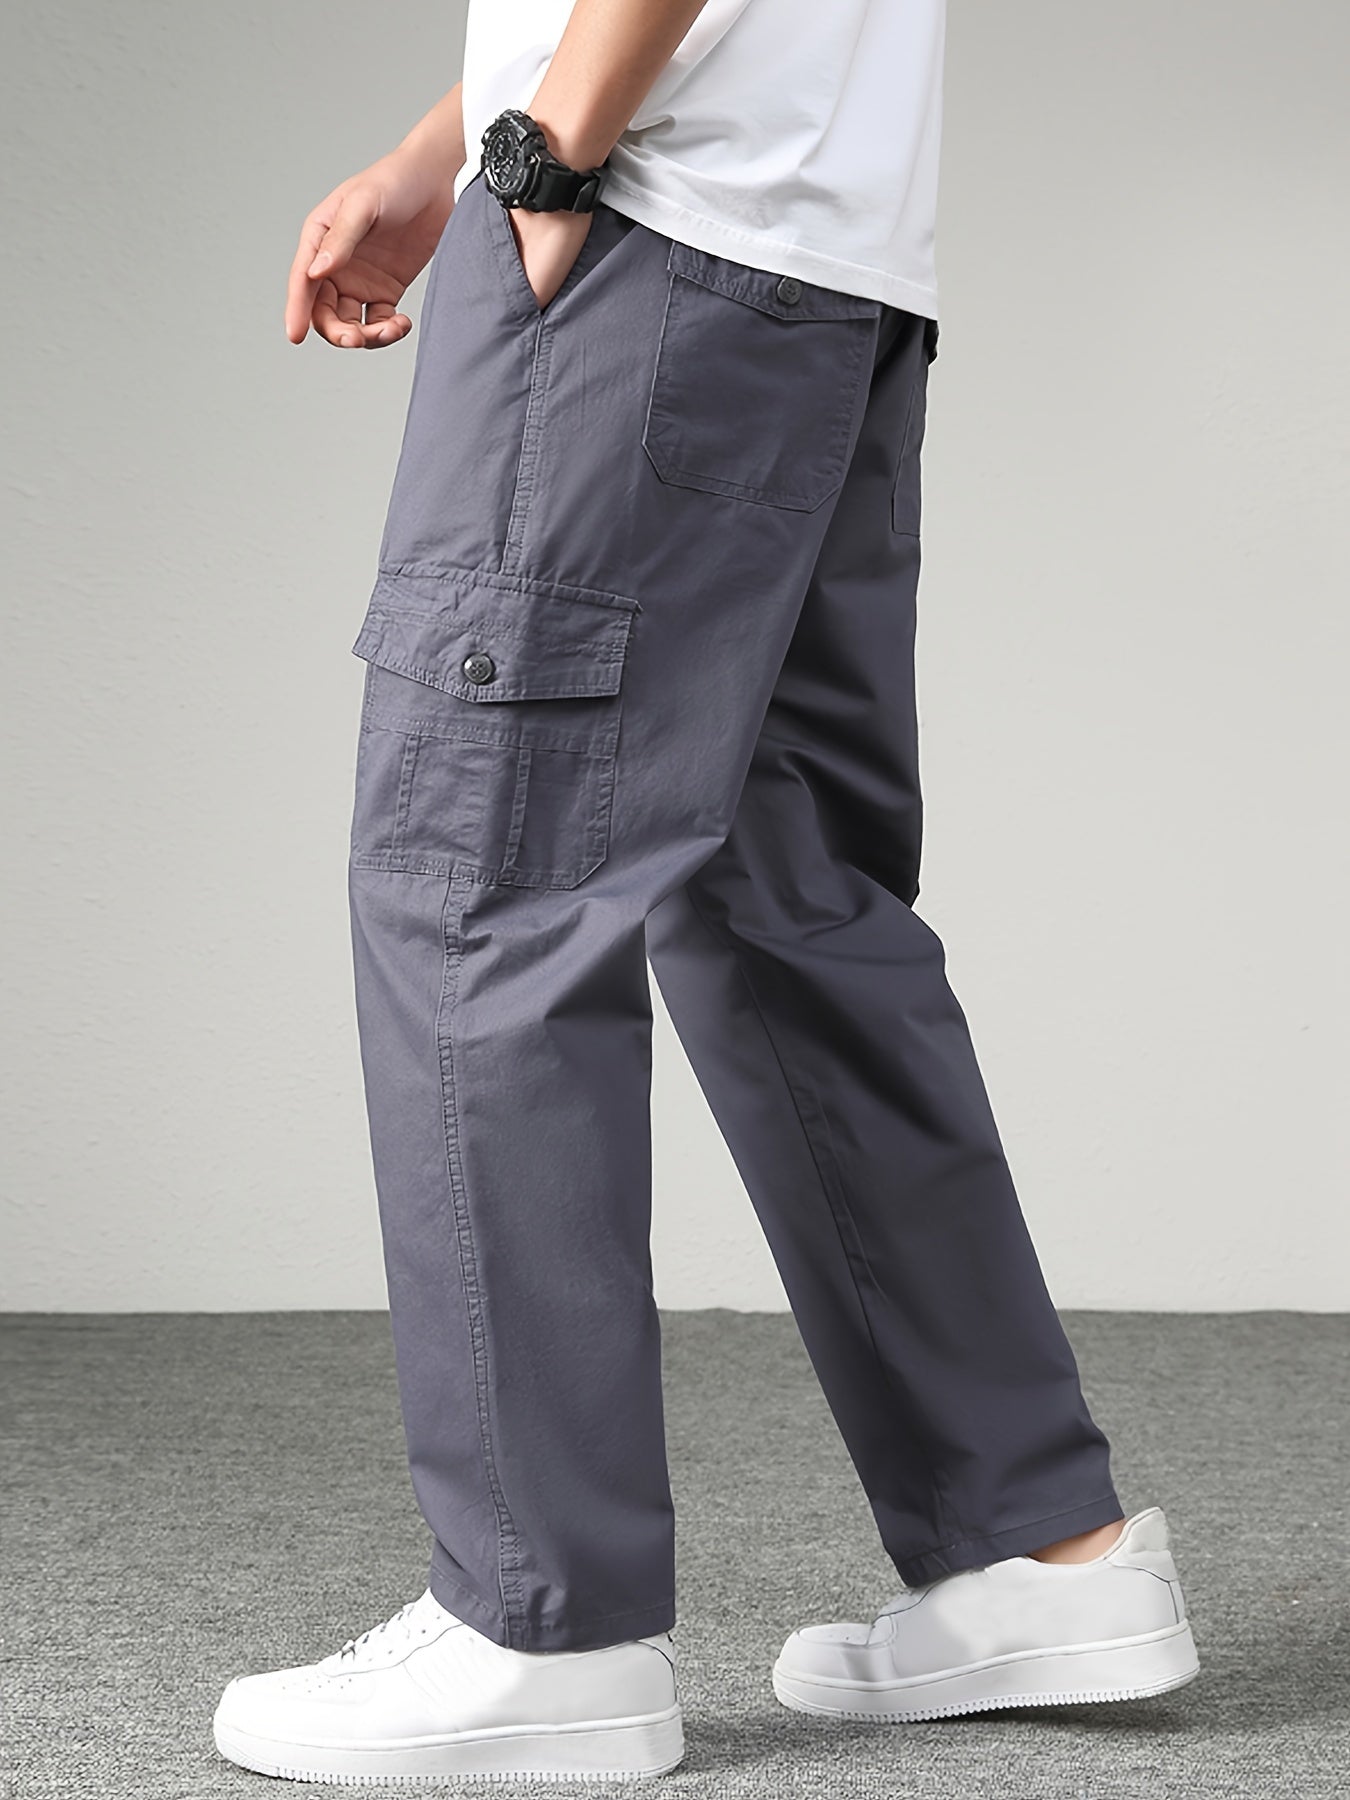 Vintage Men's Cargo Pants - Stylish Outdoor Bottoms with Pockets and Straight Leg